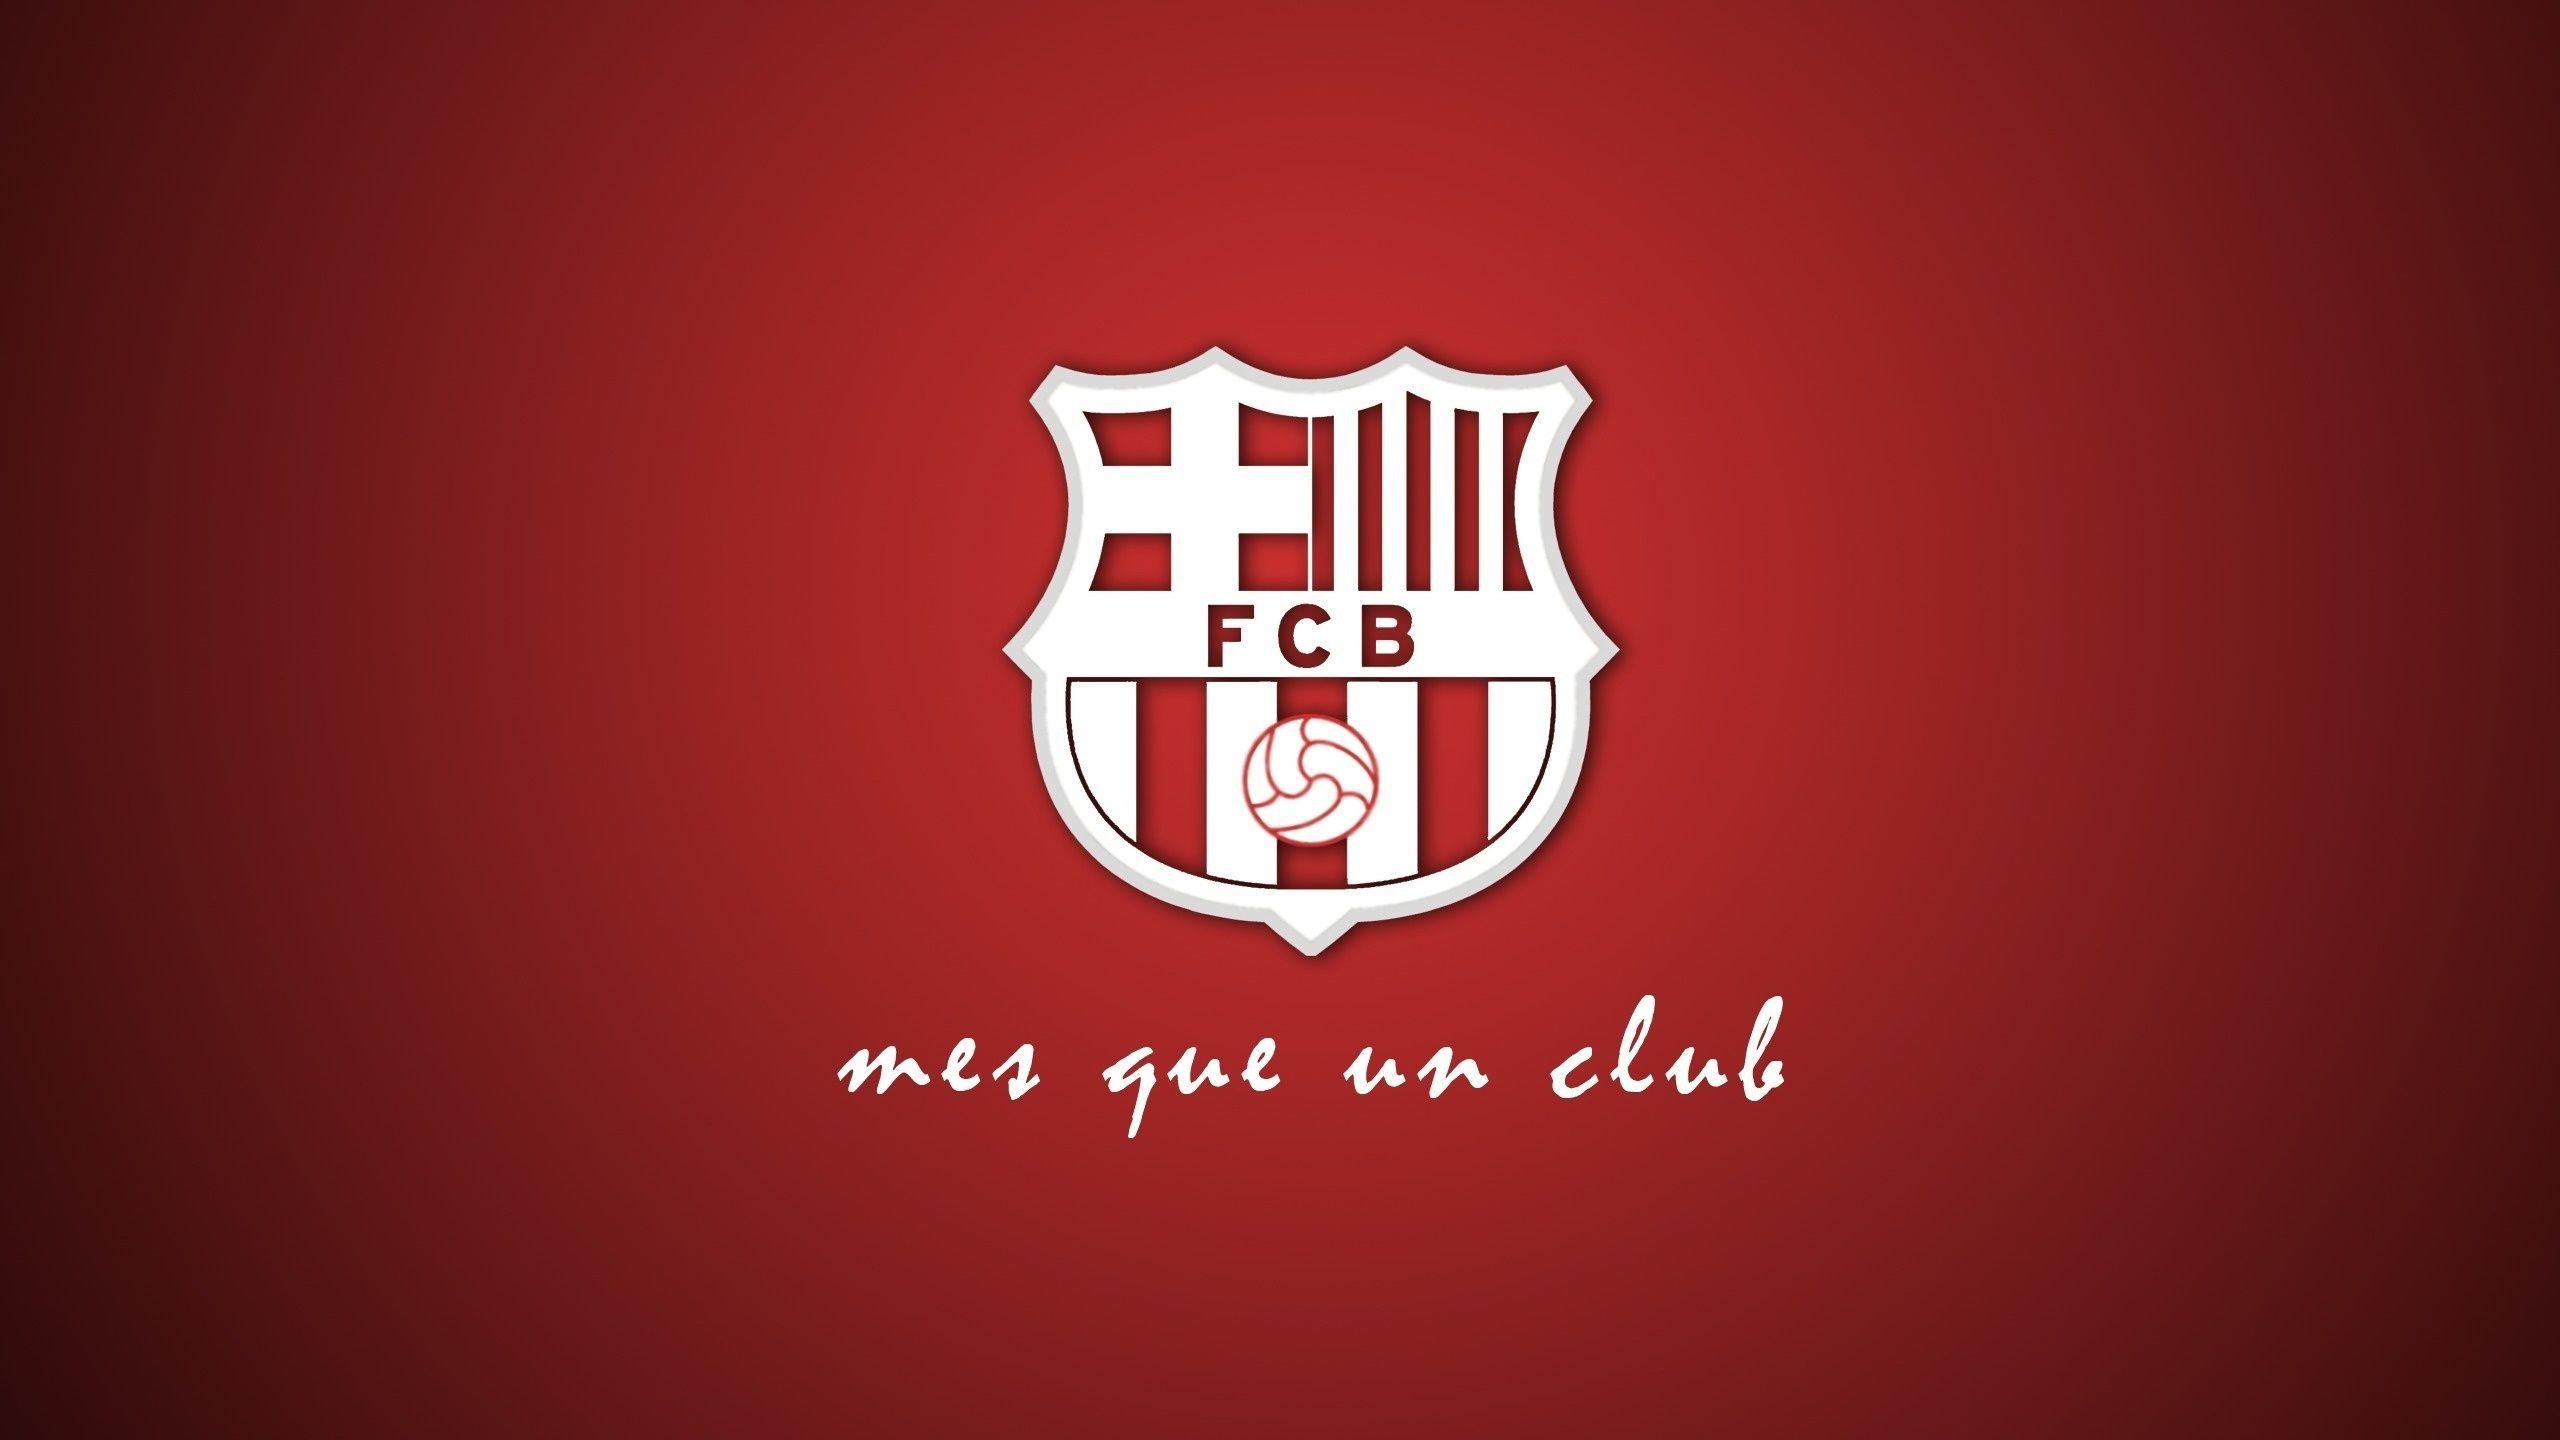 FC Barcelona Wallpaper Image Photo Picture Background